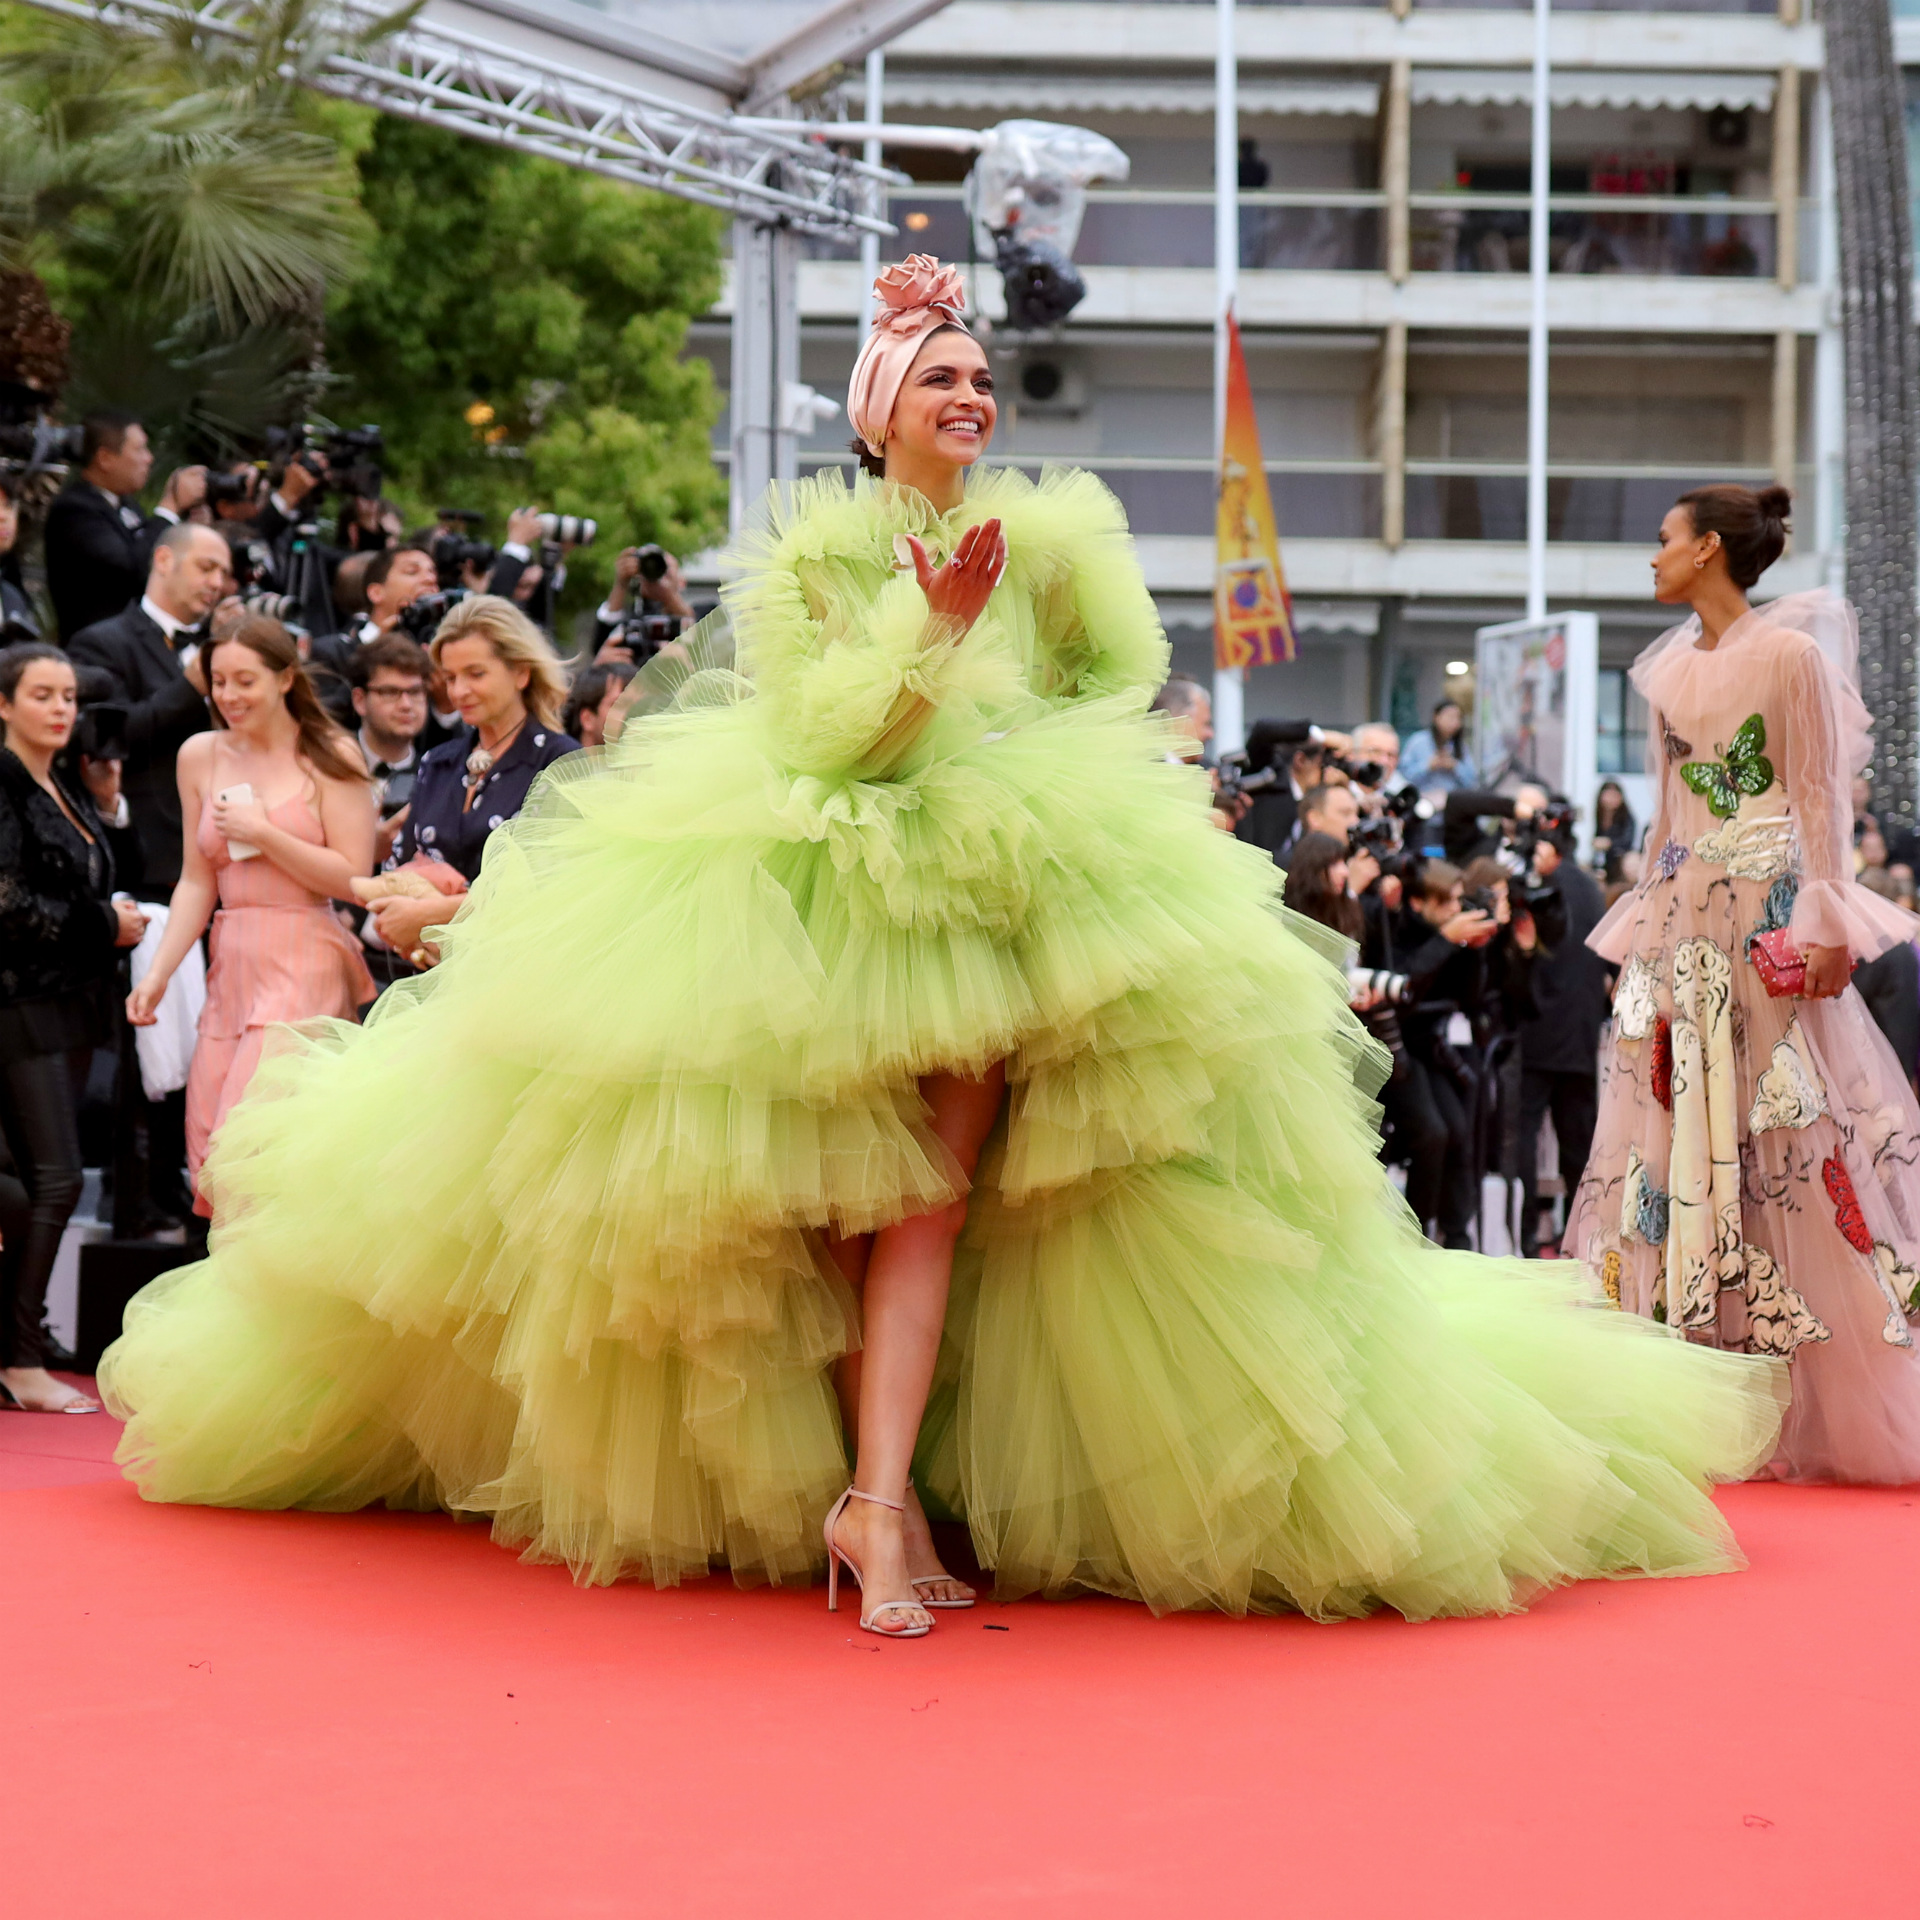 Deepika Padukone at Cannes 2019 Was All About Dramatic Gowns, Pinstripe ...